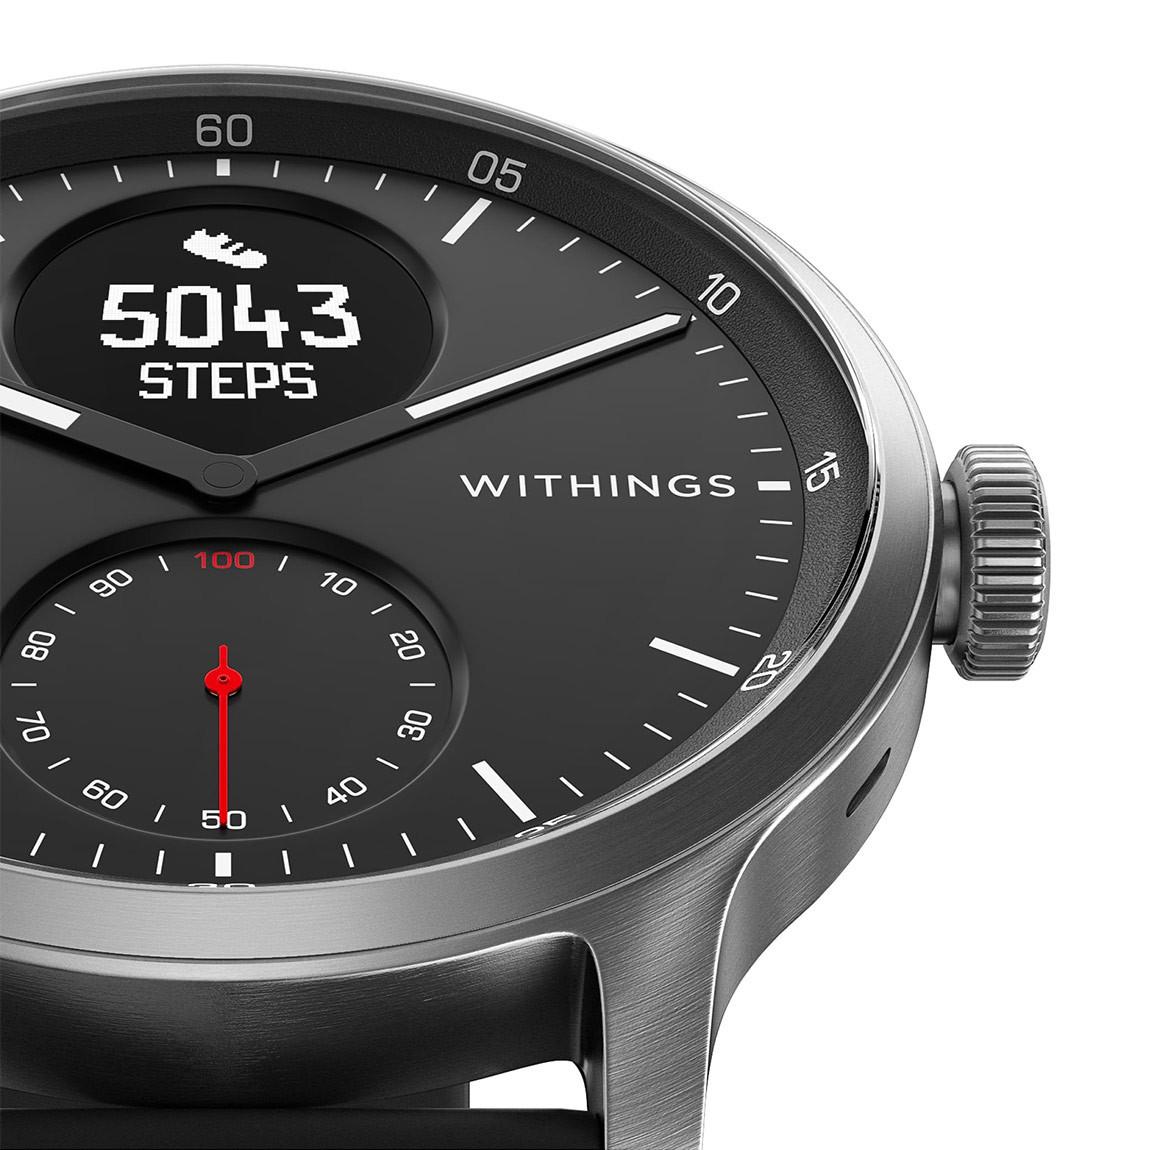 Withings ScanWatch nah